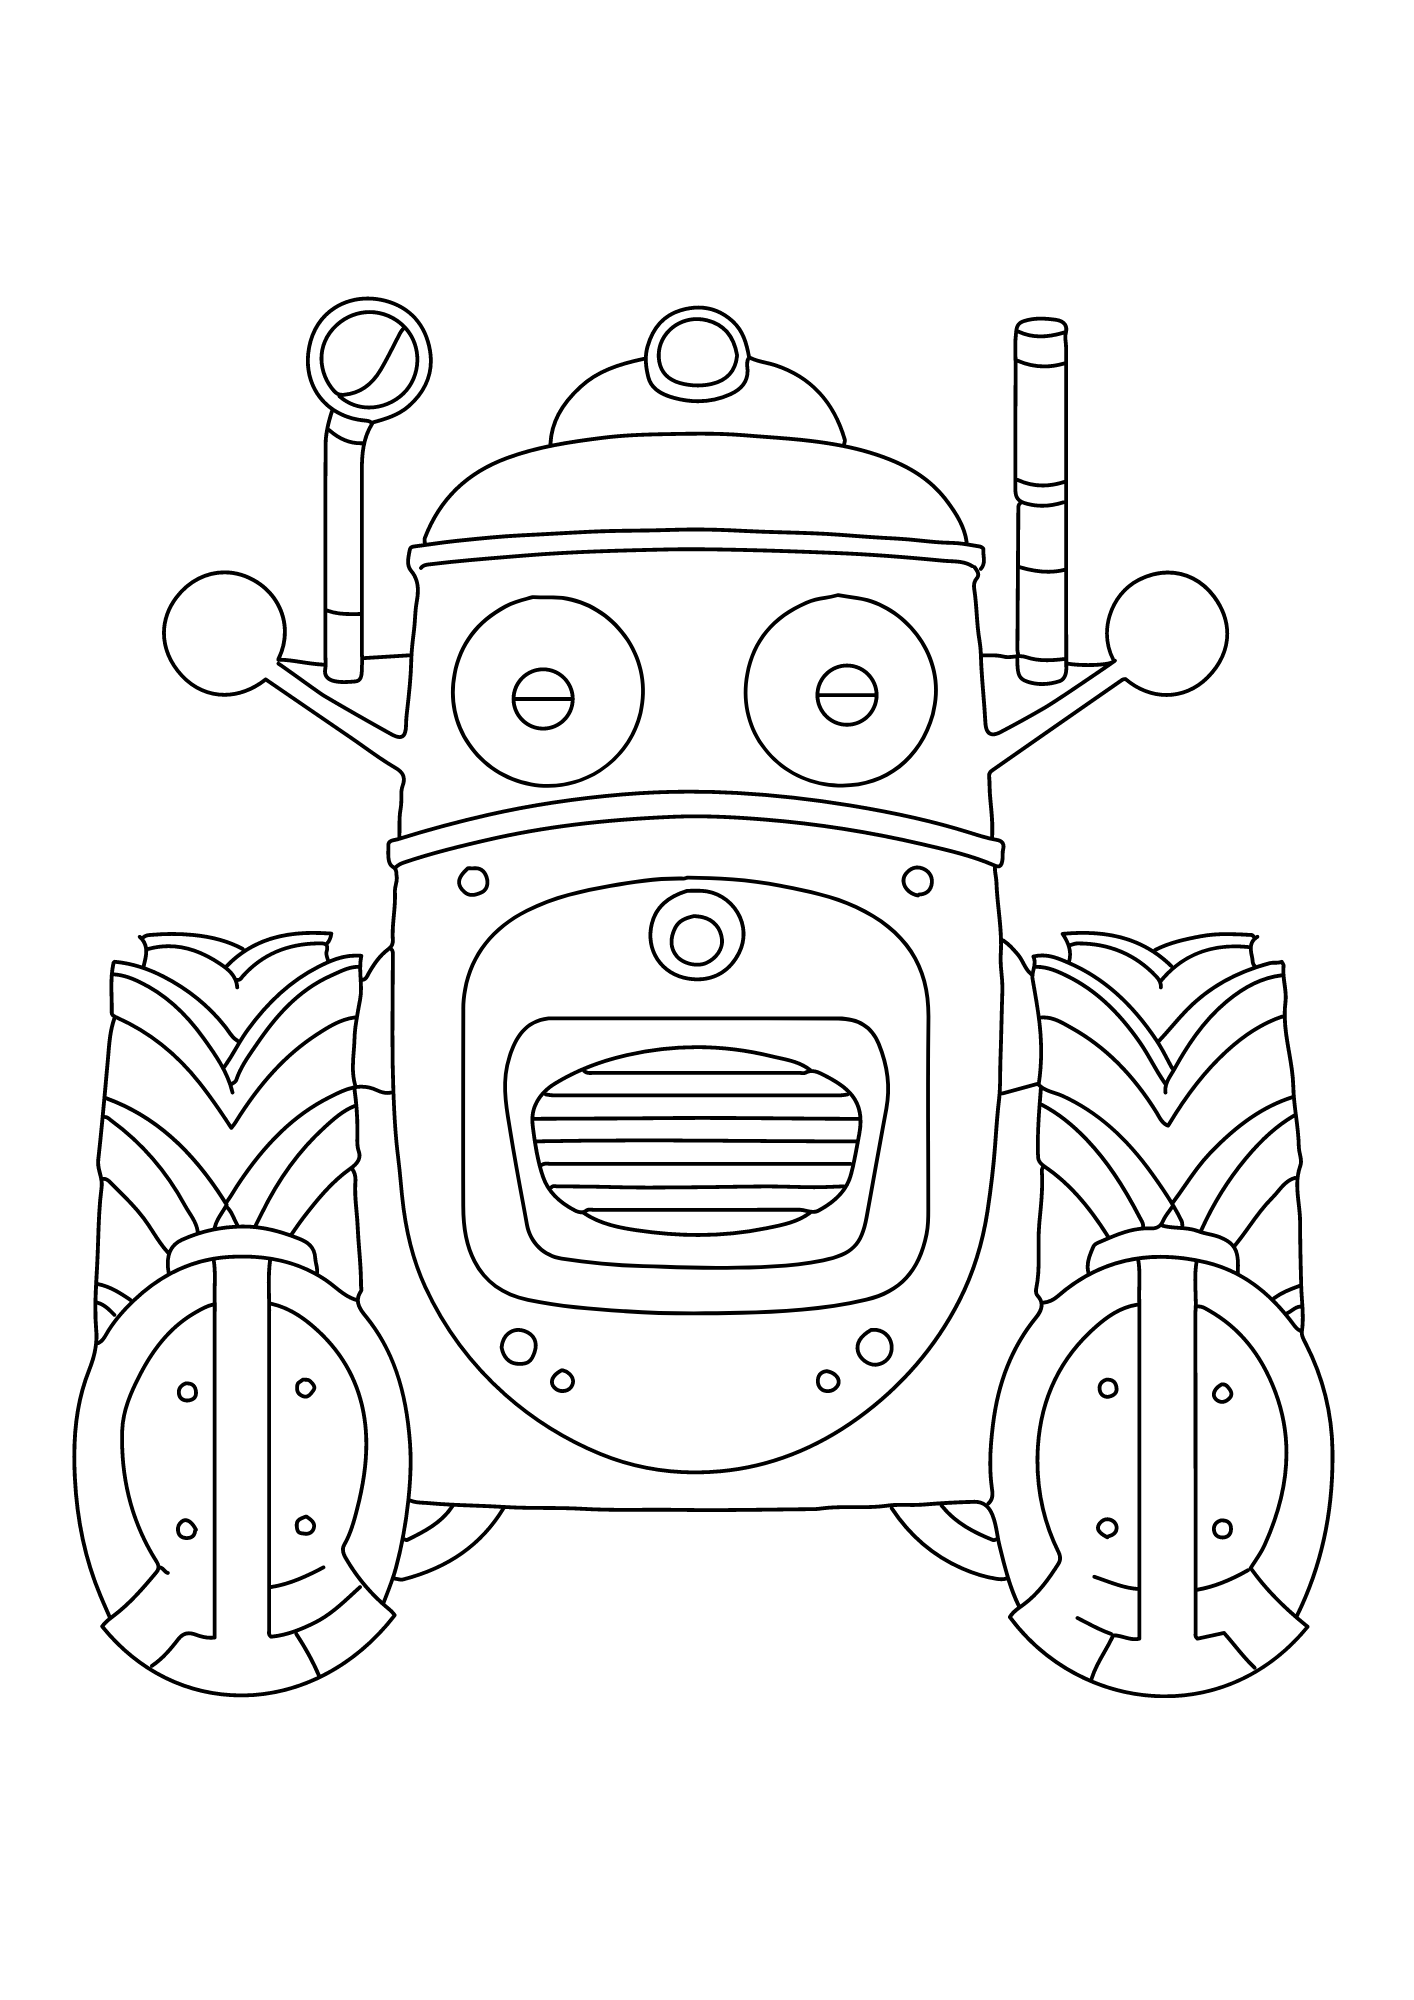 Cartoon Tractor Coloring Pages